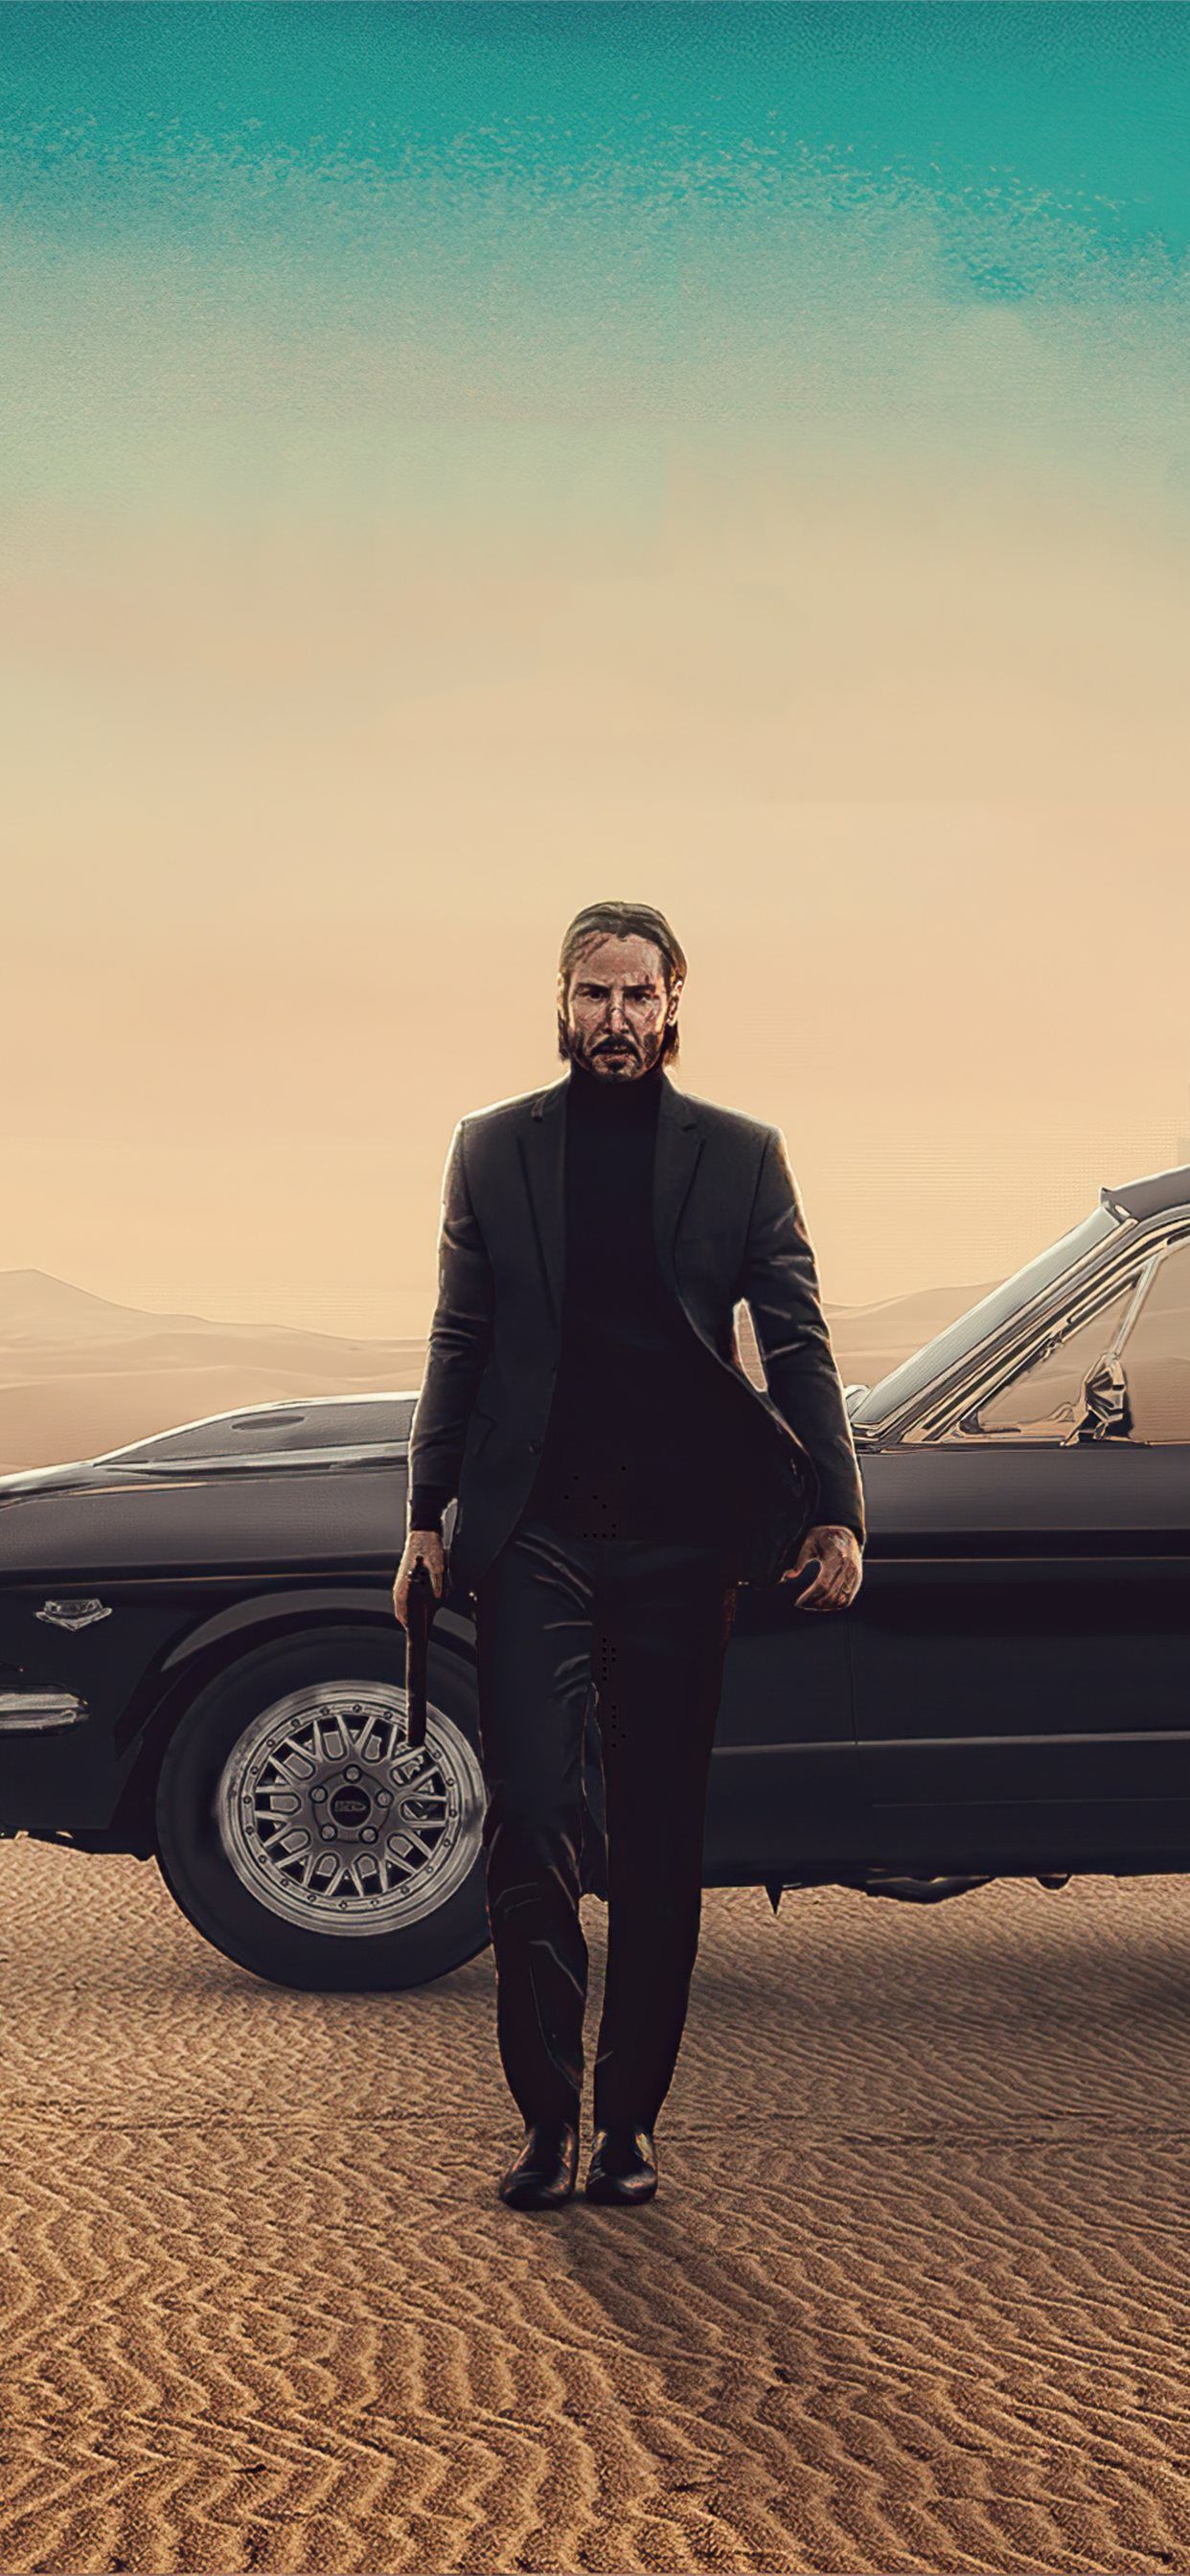 john wick with mustang iPhone X Wallpaper Free Download